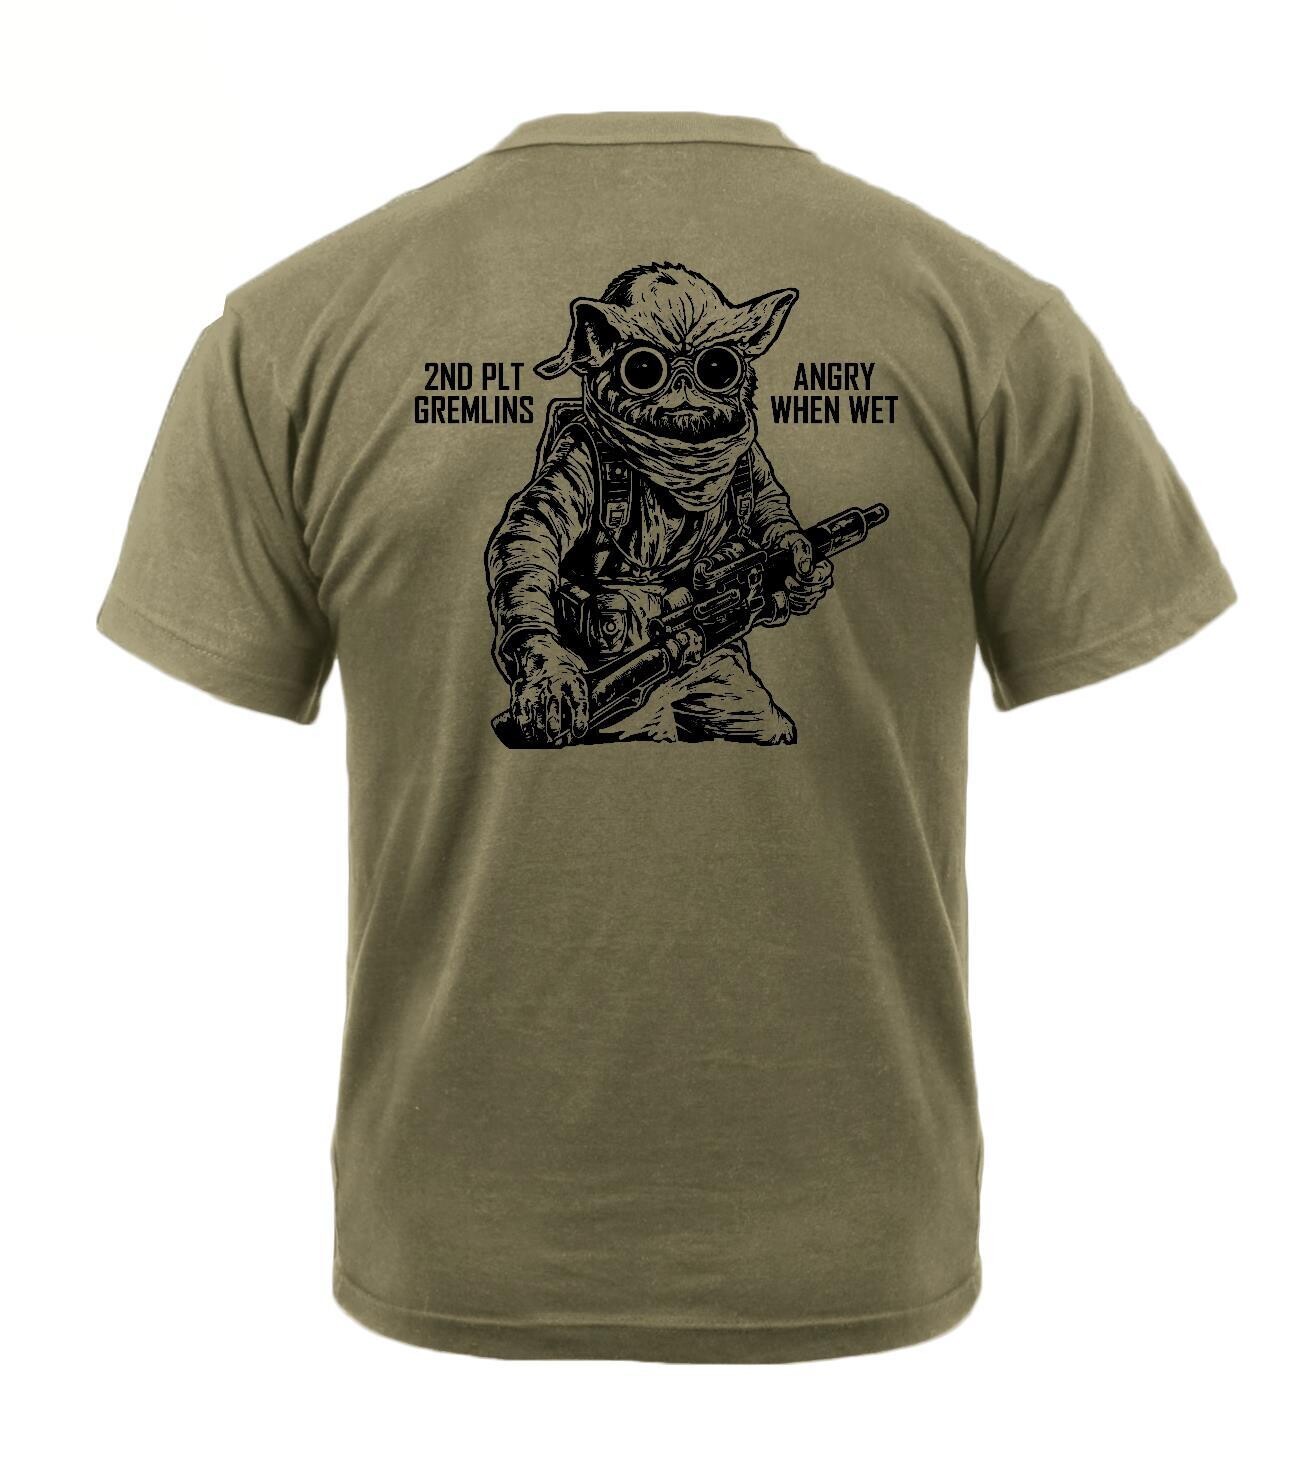 2nd PLT D Co "Gremlins" 3-187th Coyote Shirt